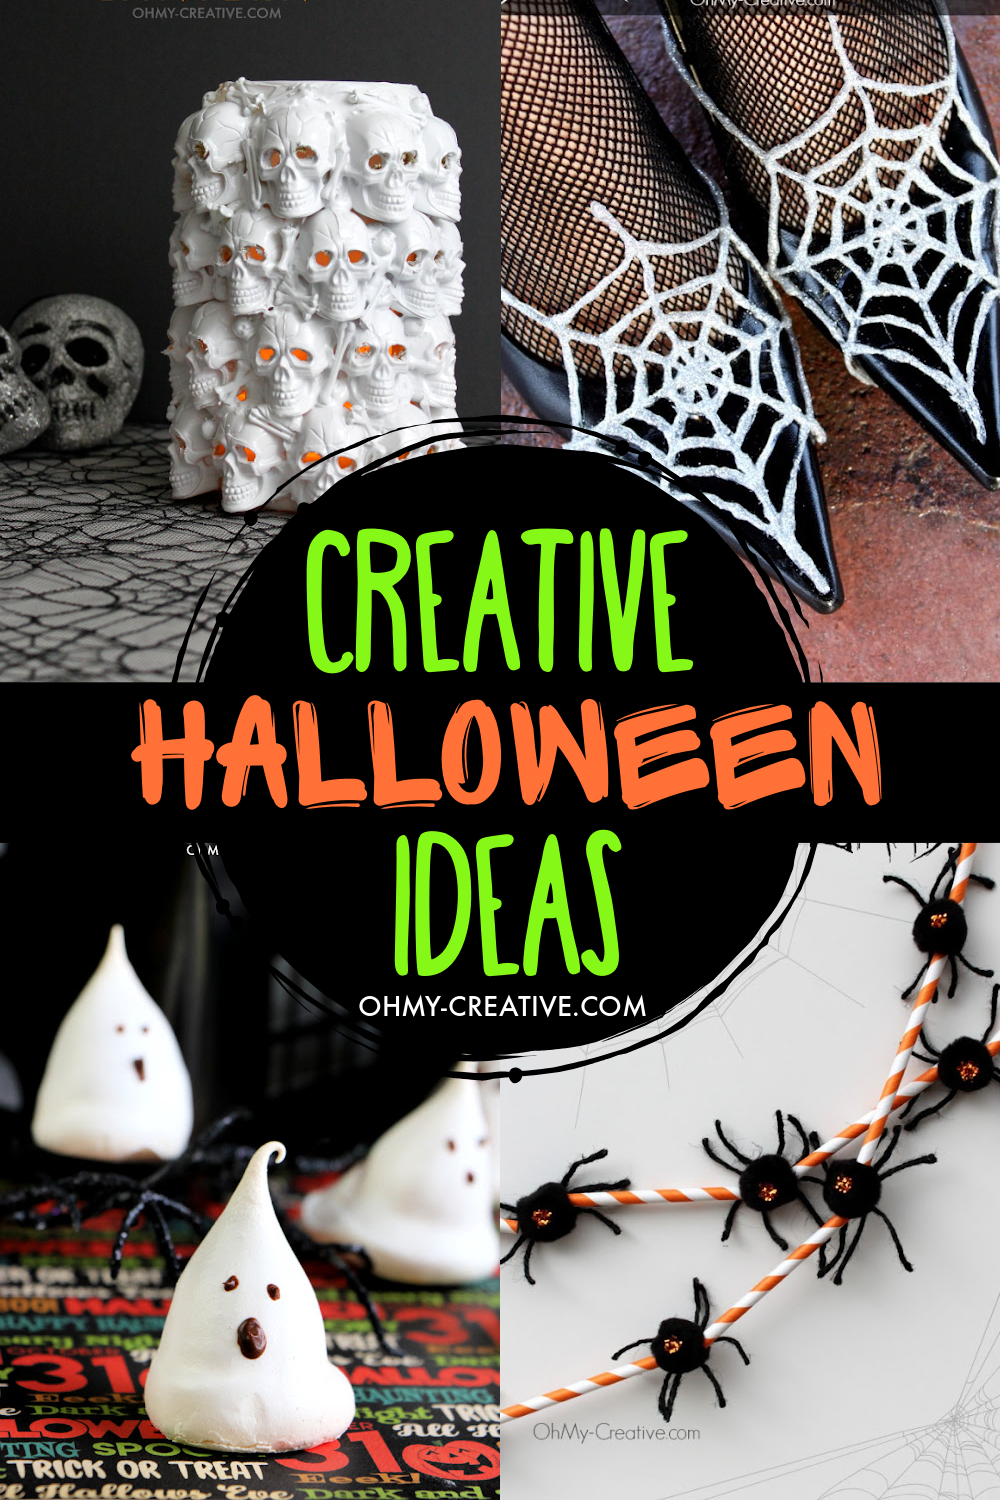 A pinterest collage of creative Halloween ideas including Halloween crafts, recipes, drinks and party ideas.